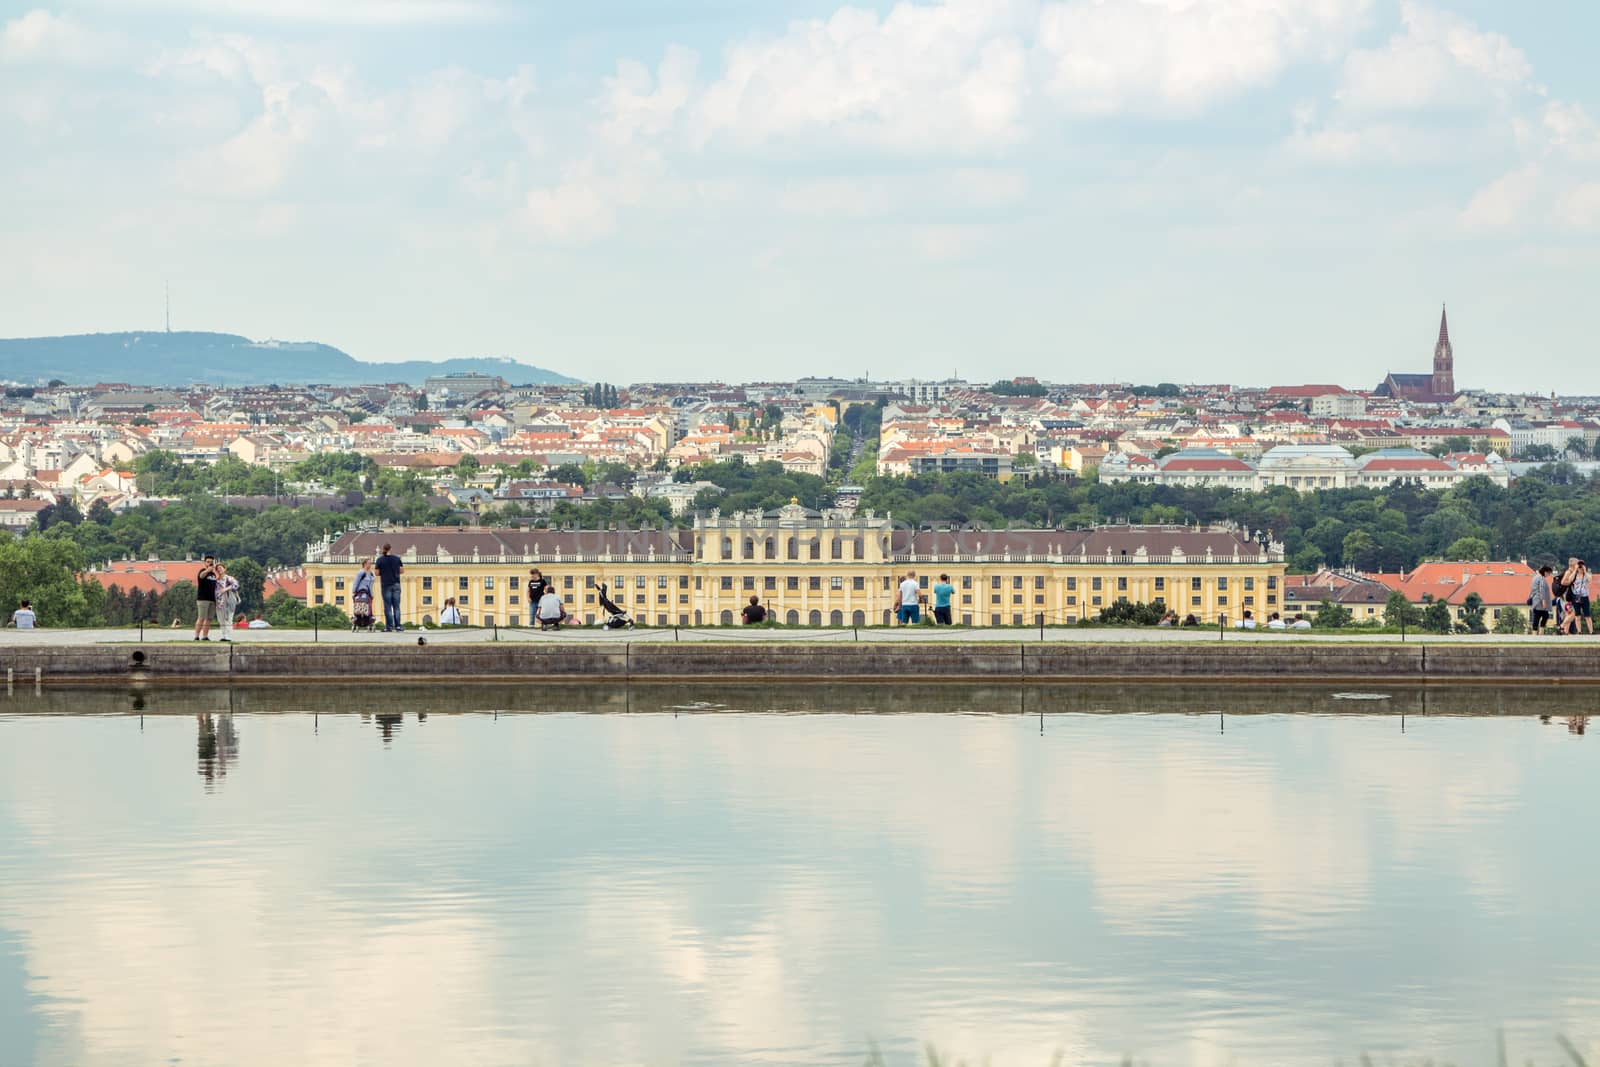 Schonbrunn palace against cityscape by MysteryShot